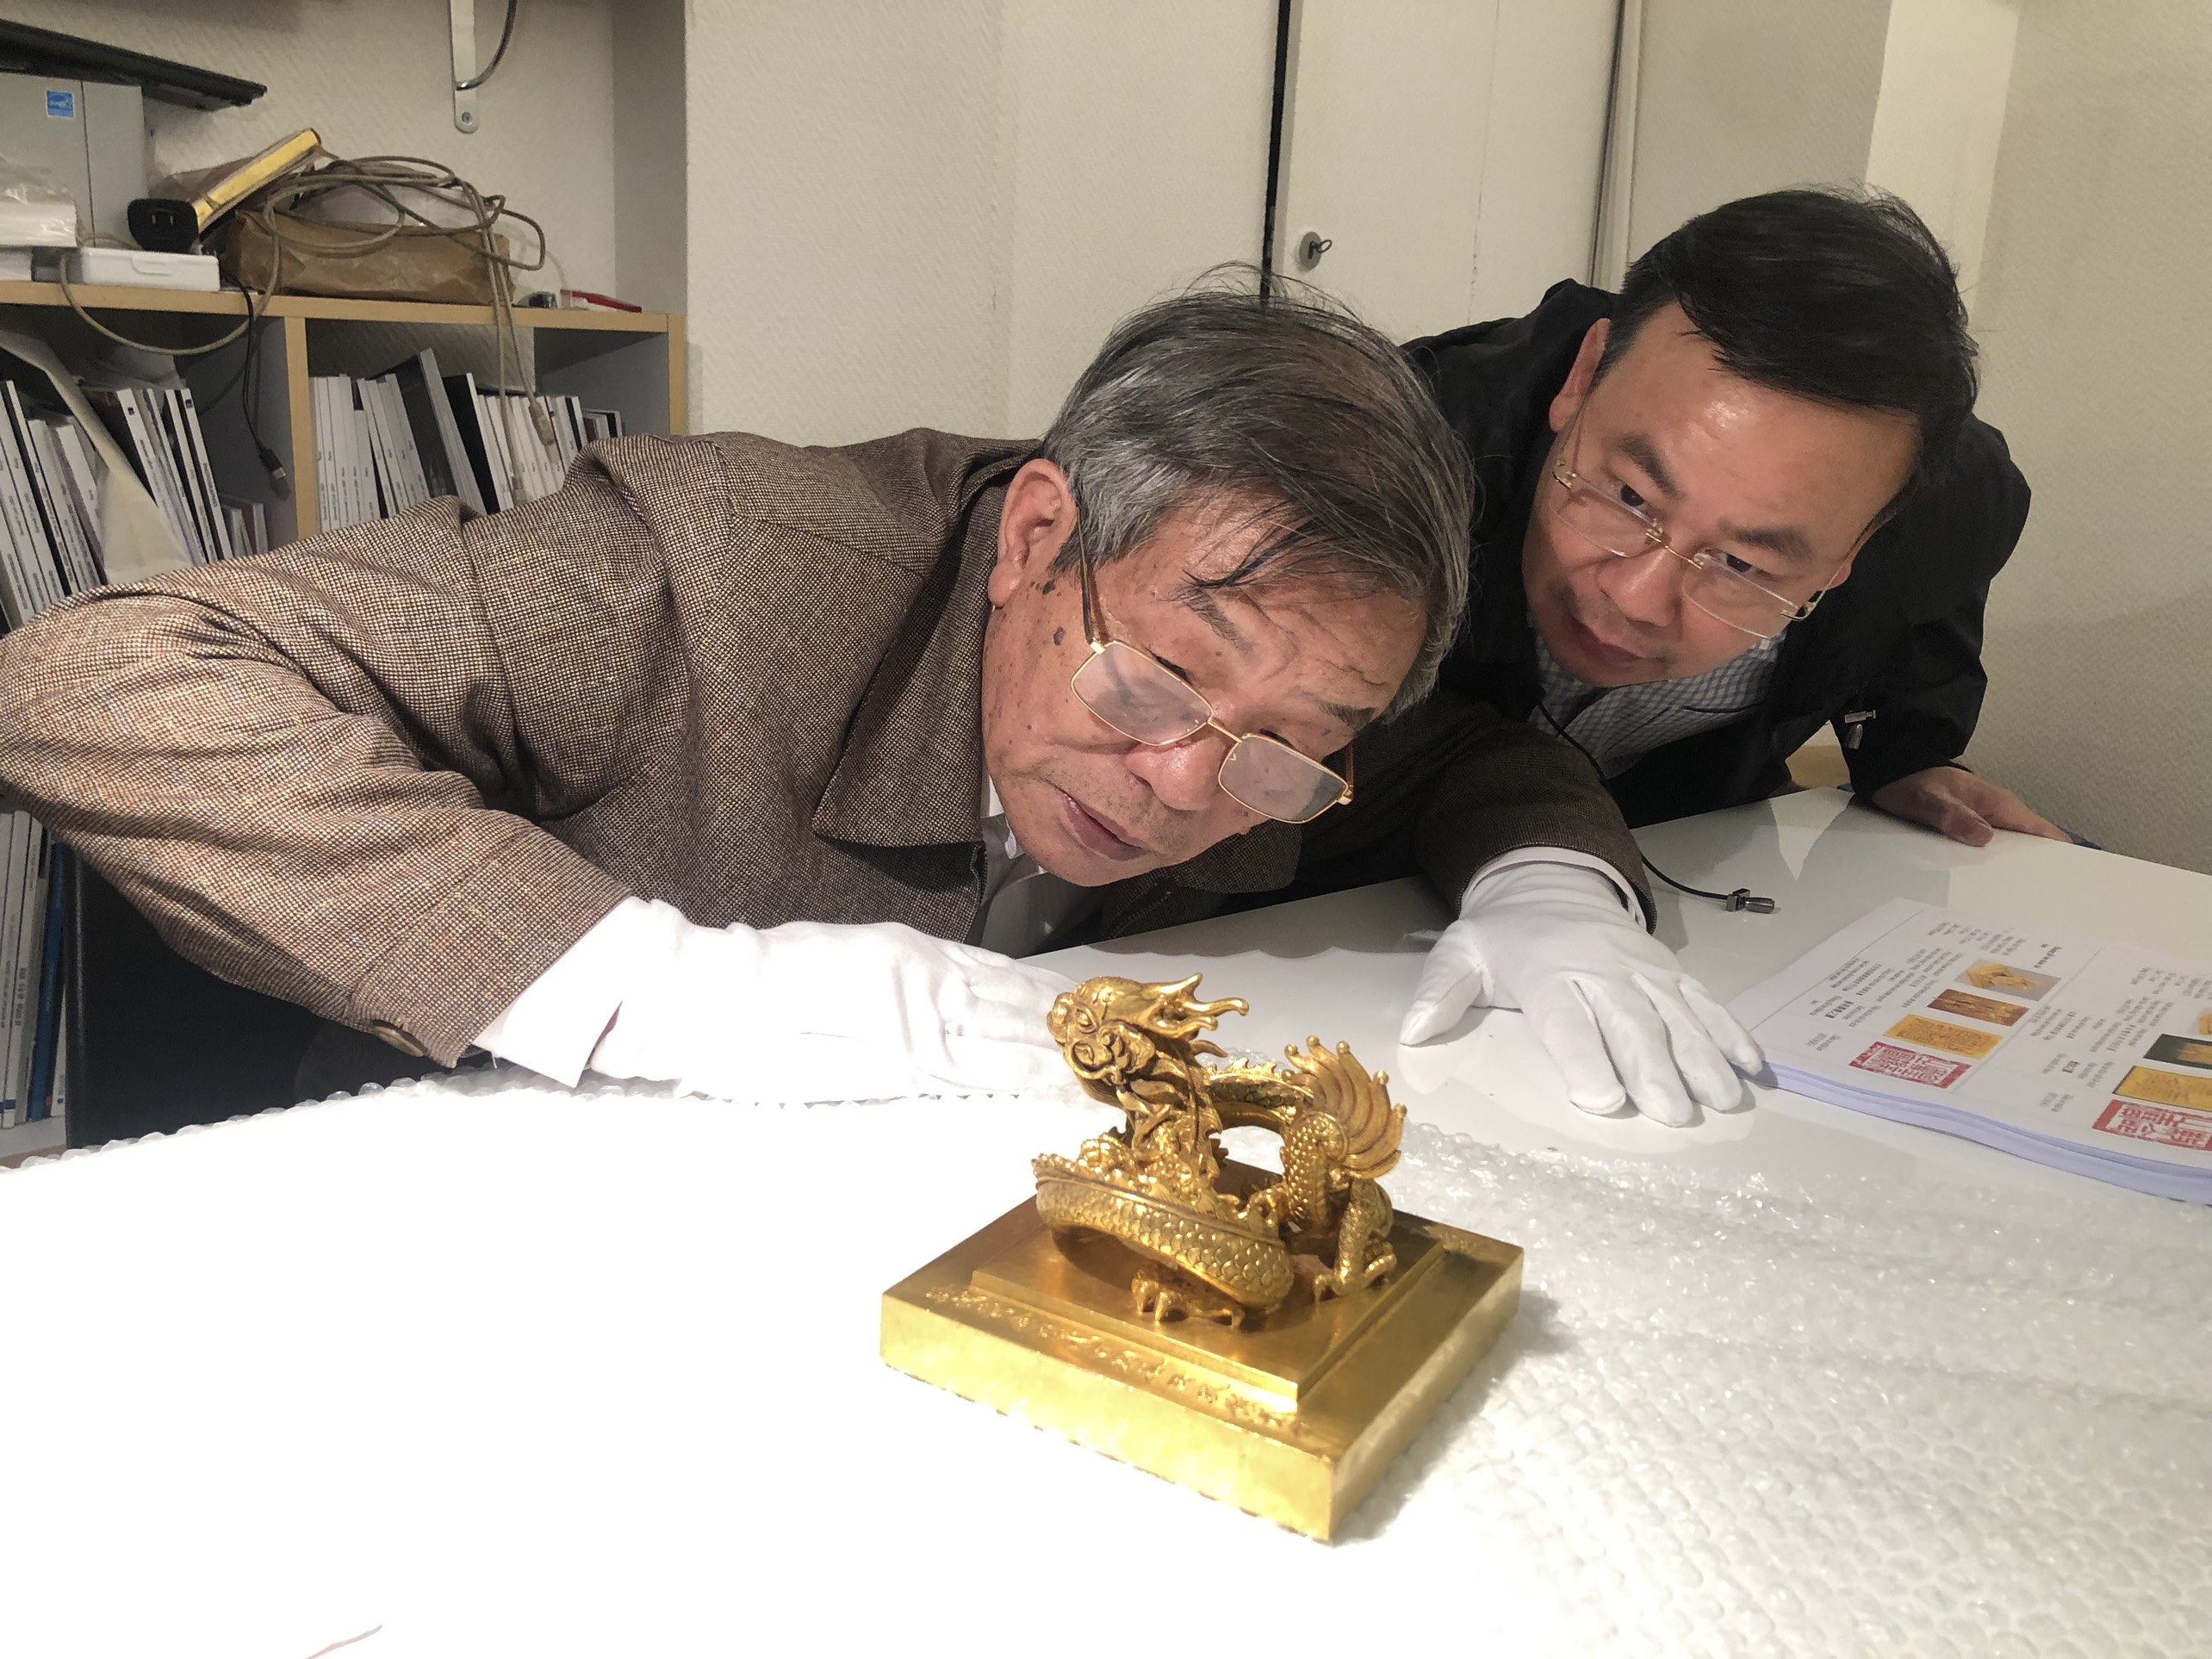 Officials evaluate the gold seal at auction house Millon’s office in Paris, France. Photo: Department of Cultural Heritage